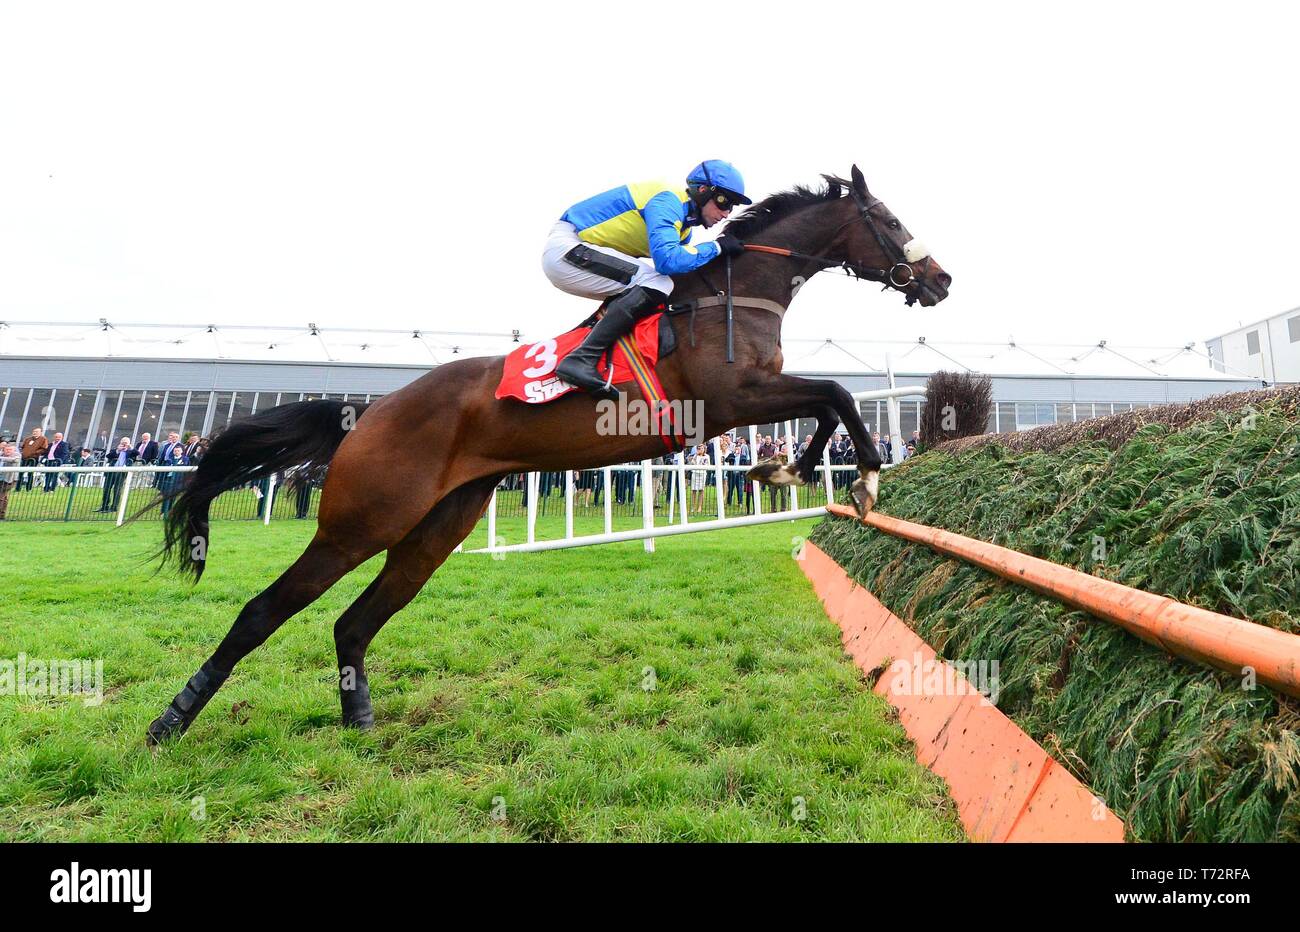 Caid Du Berlais and Will Biddick jump the last to win the Champion Hunters Steeplechase during day four of the Punchestown Festival at Punchestown Racecourse, County Kildare, Ireland. Stock Photo